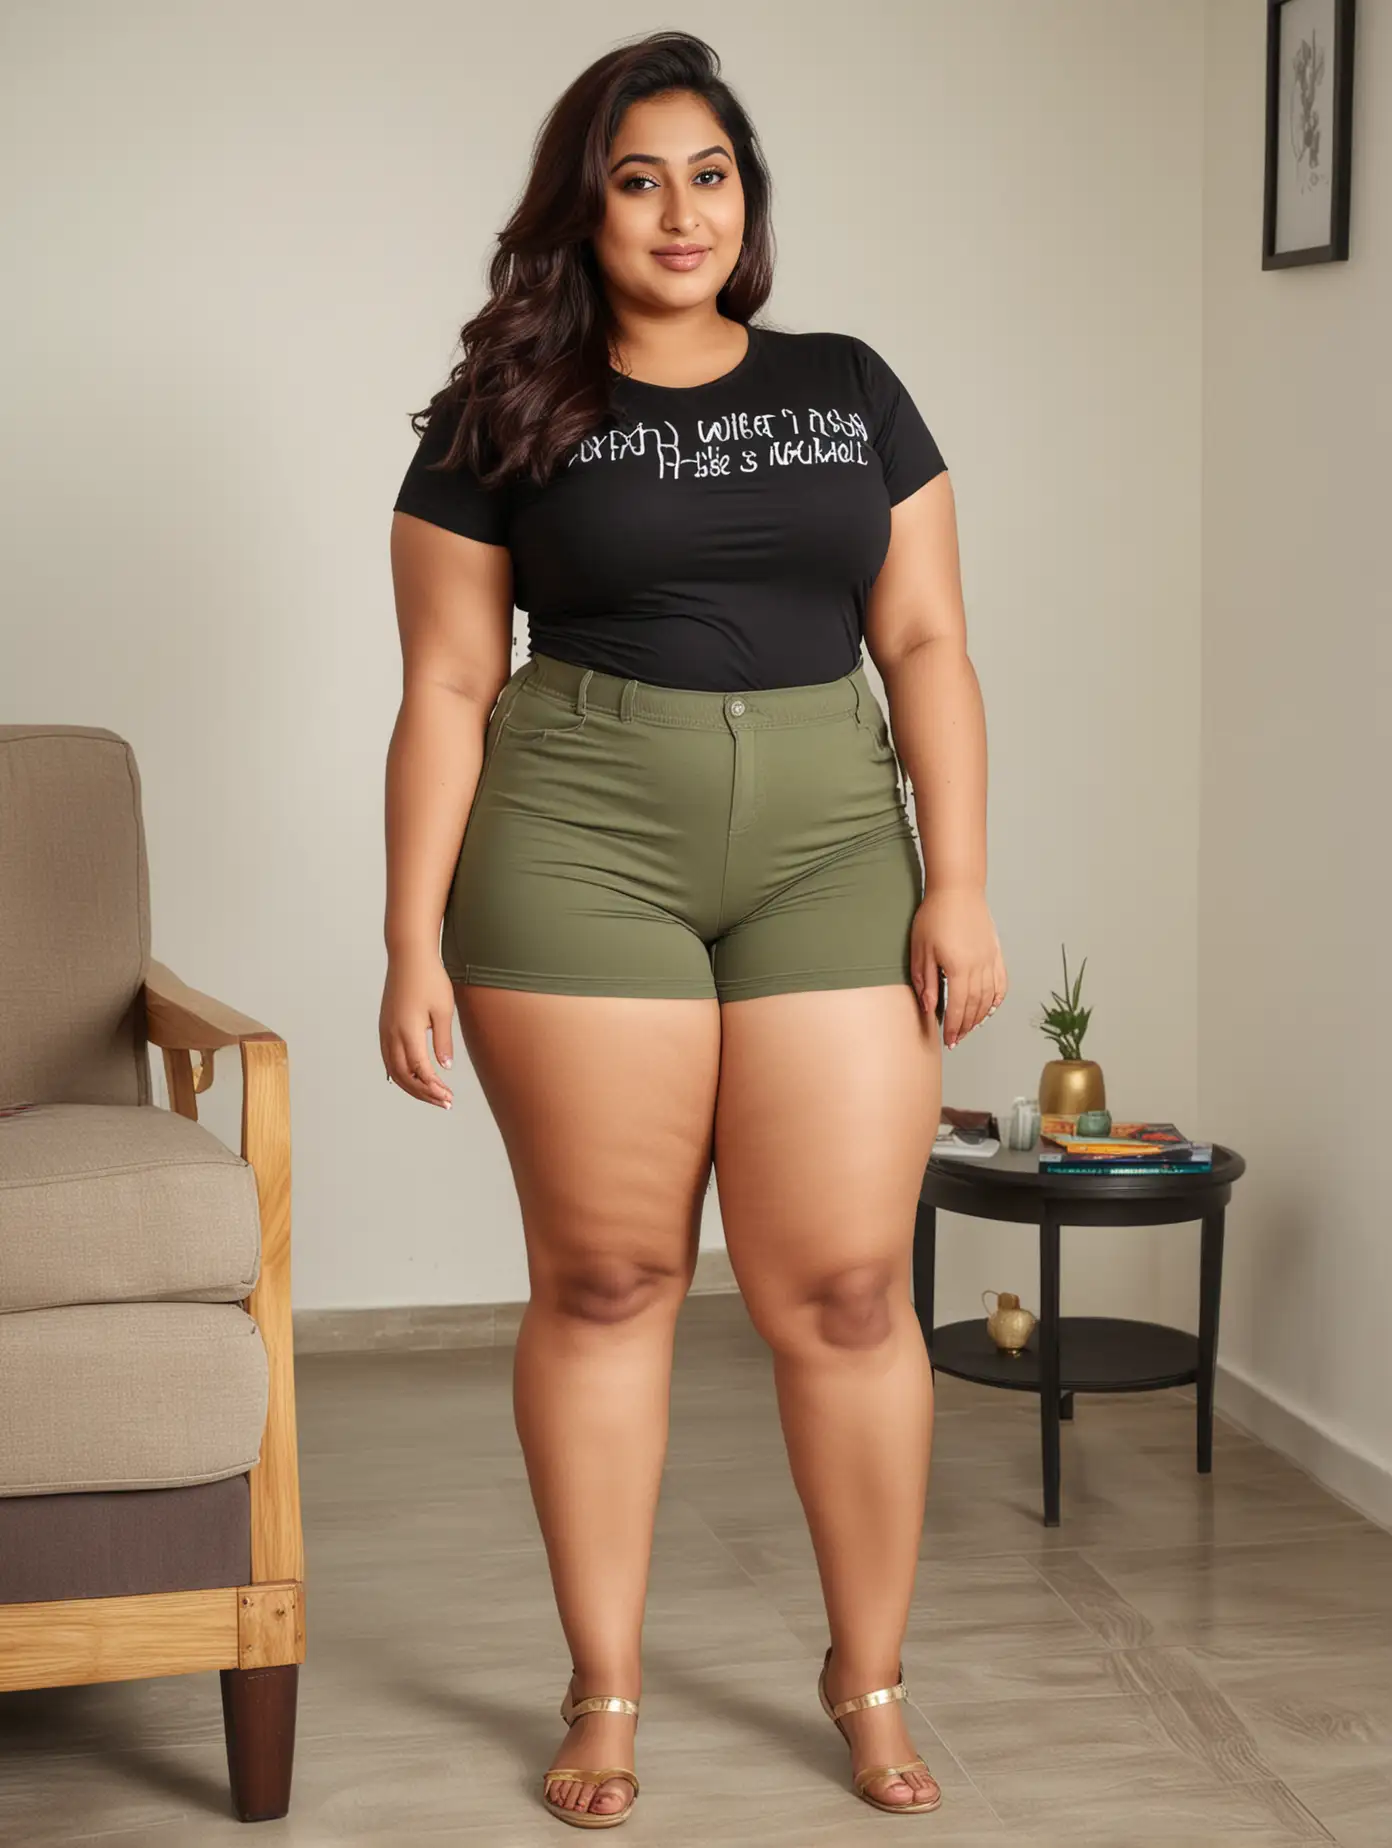 Beautiful indian plus size curvy women wore tight t shirt and shorts at home